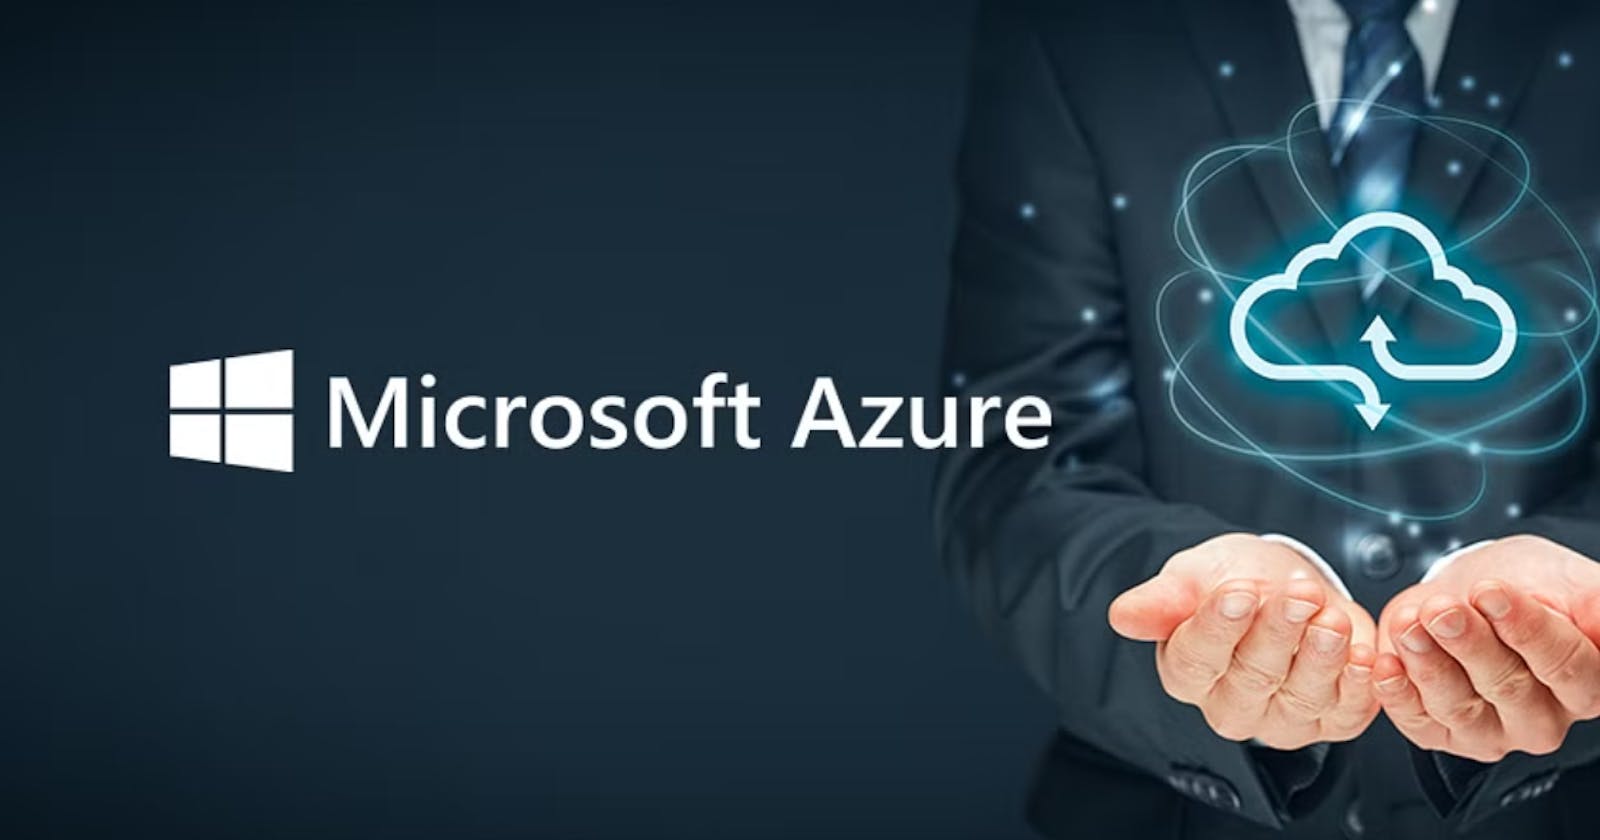 Introduction to Microsoft Azure | A cloud computing service